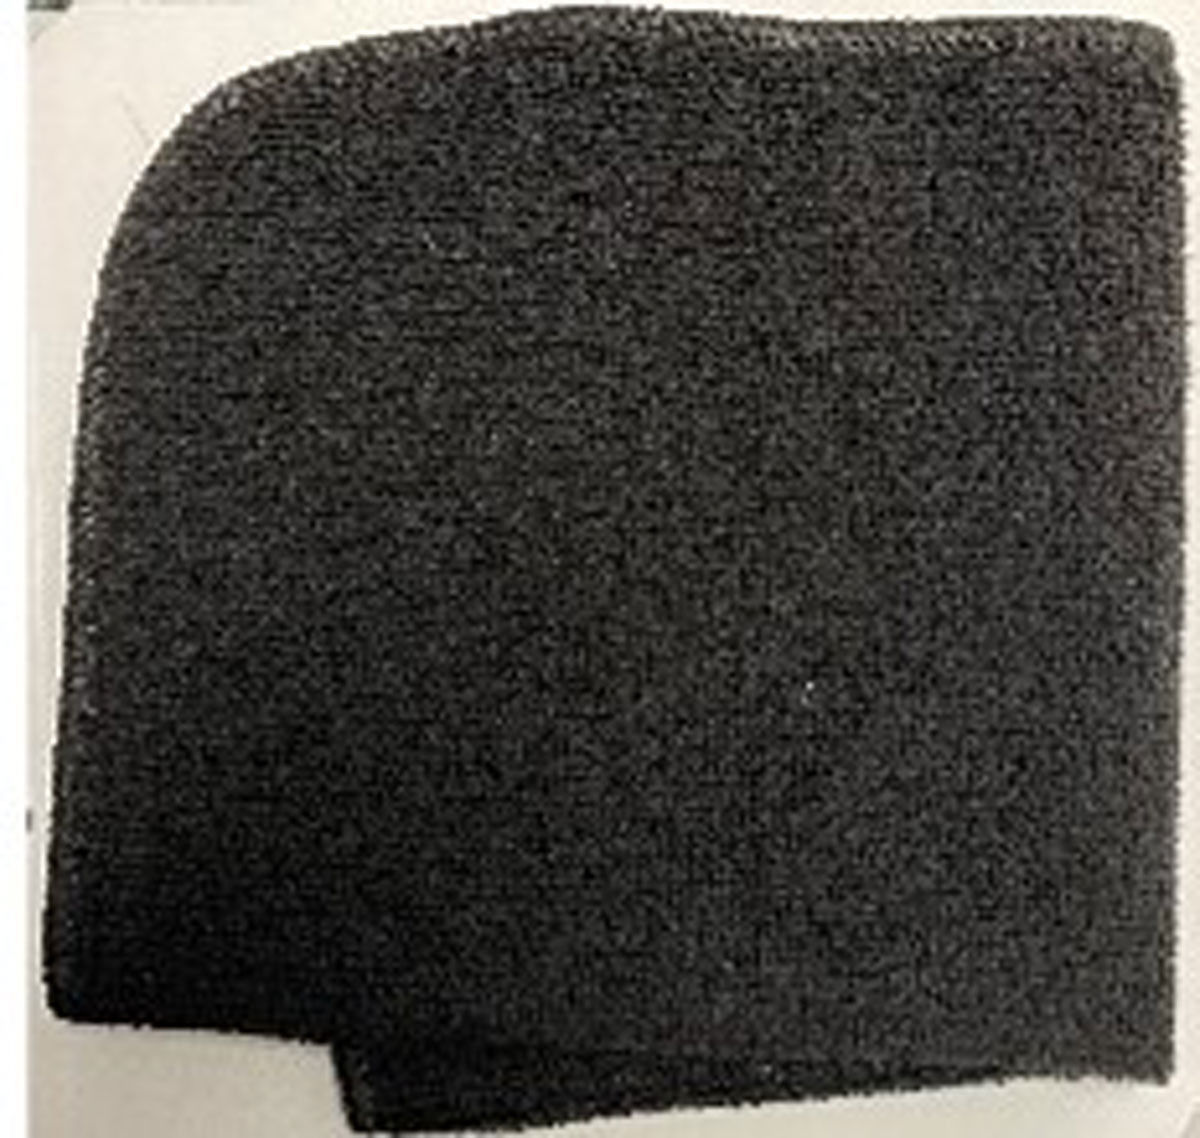 What is the purpose of this black microfiber towel?